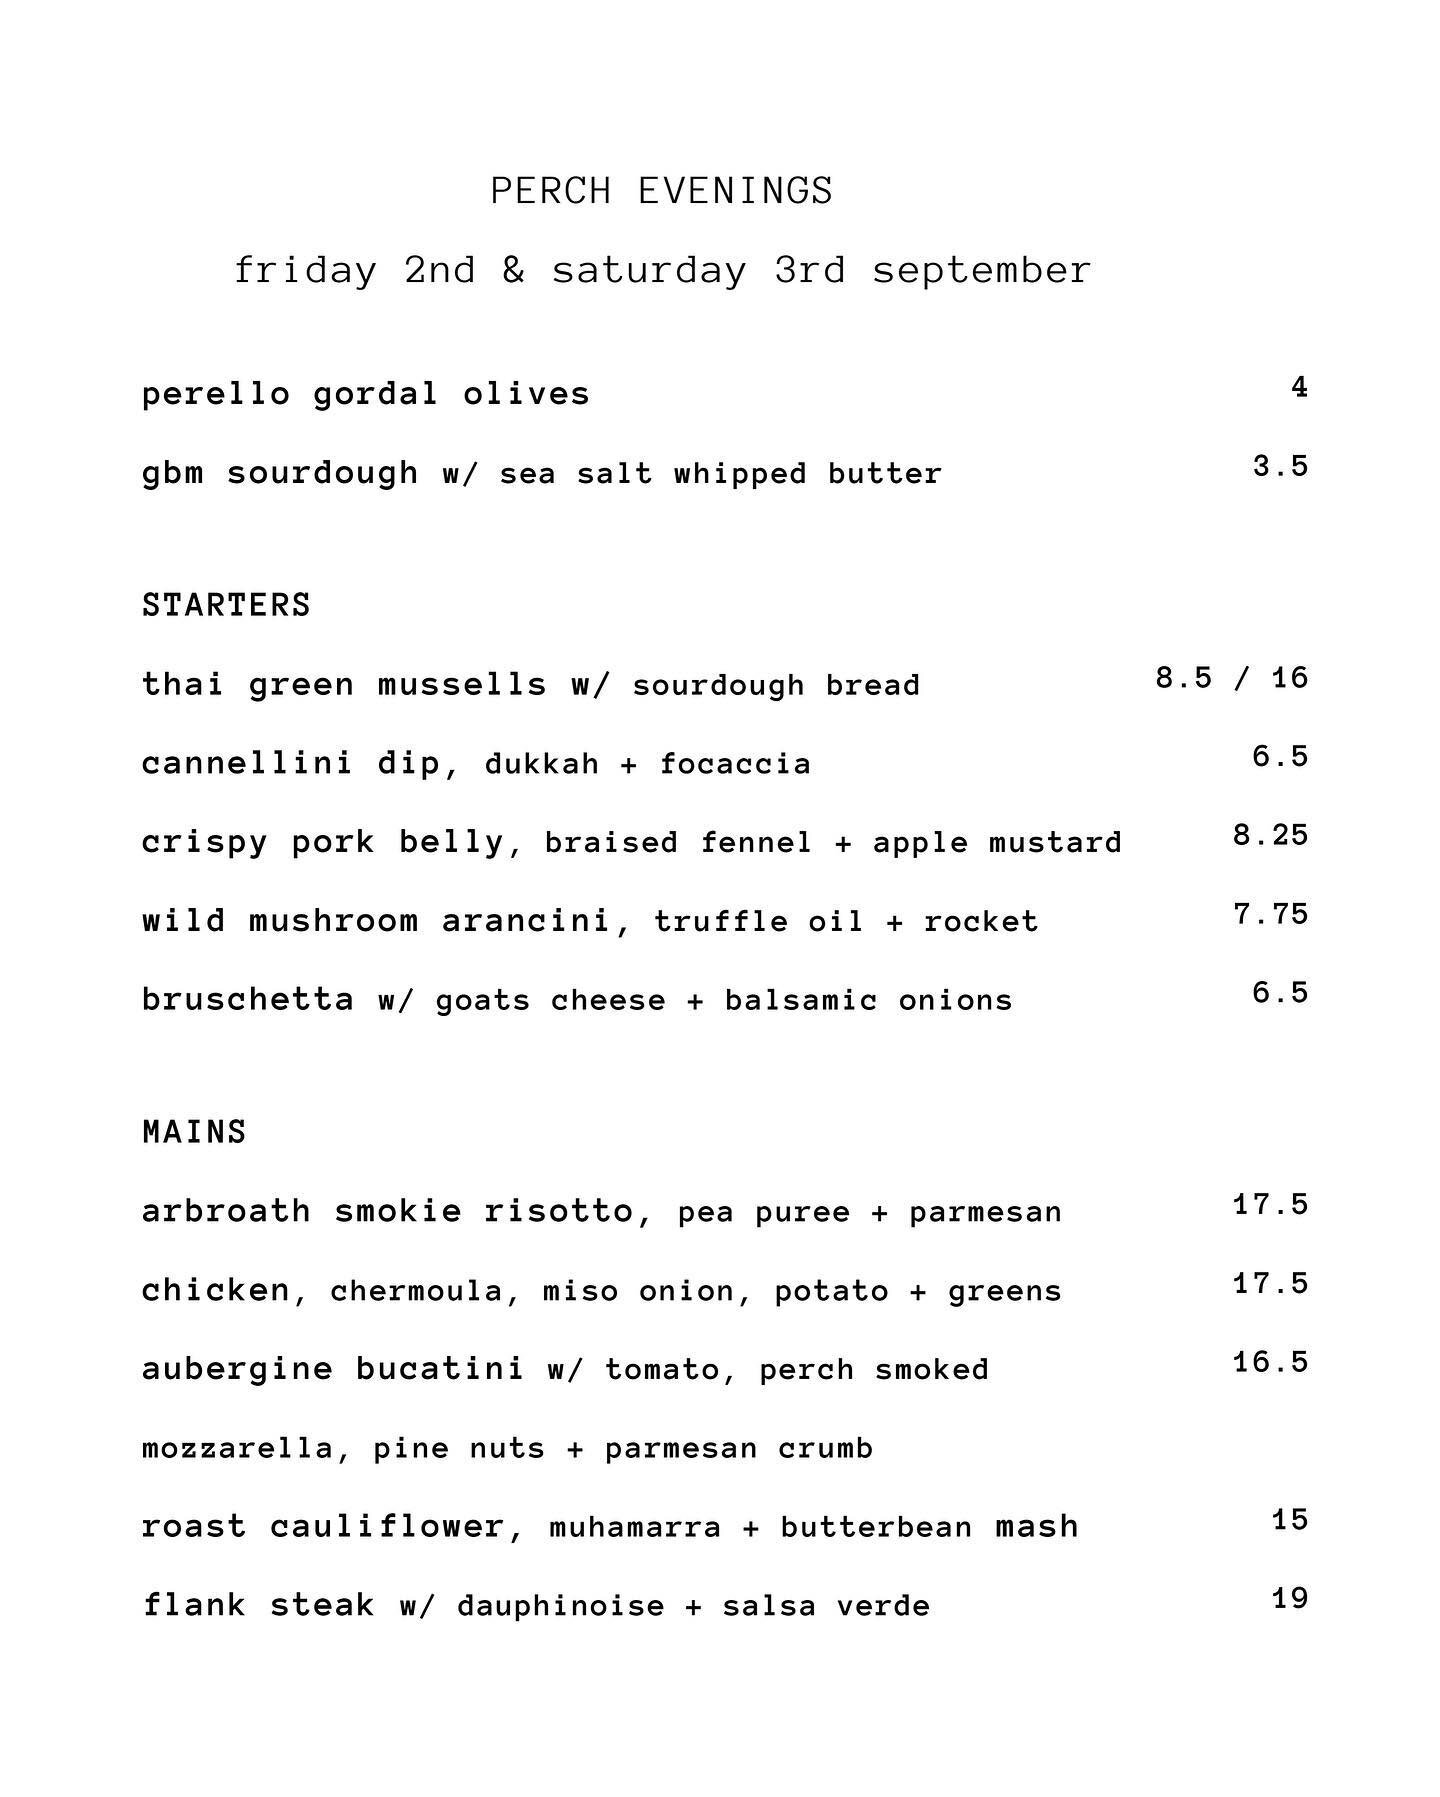 THIS WEEKEND! Here&rsquo;s the menu for our final weekend of Perch Summer Evenings&hellip; this Friday &amp; Saturday evening from 6pm onwards!

Send us an email at hello.theperch@gmail.com to book a table!